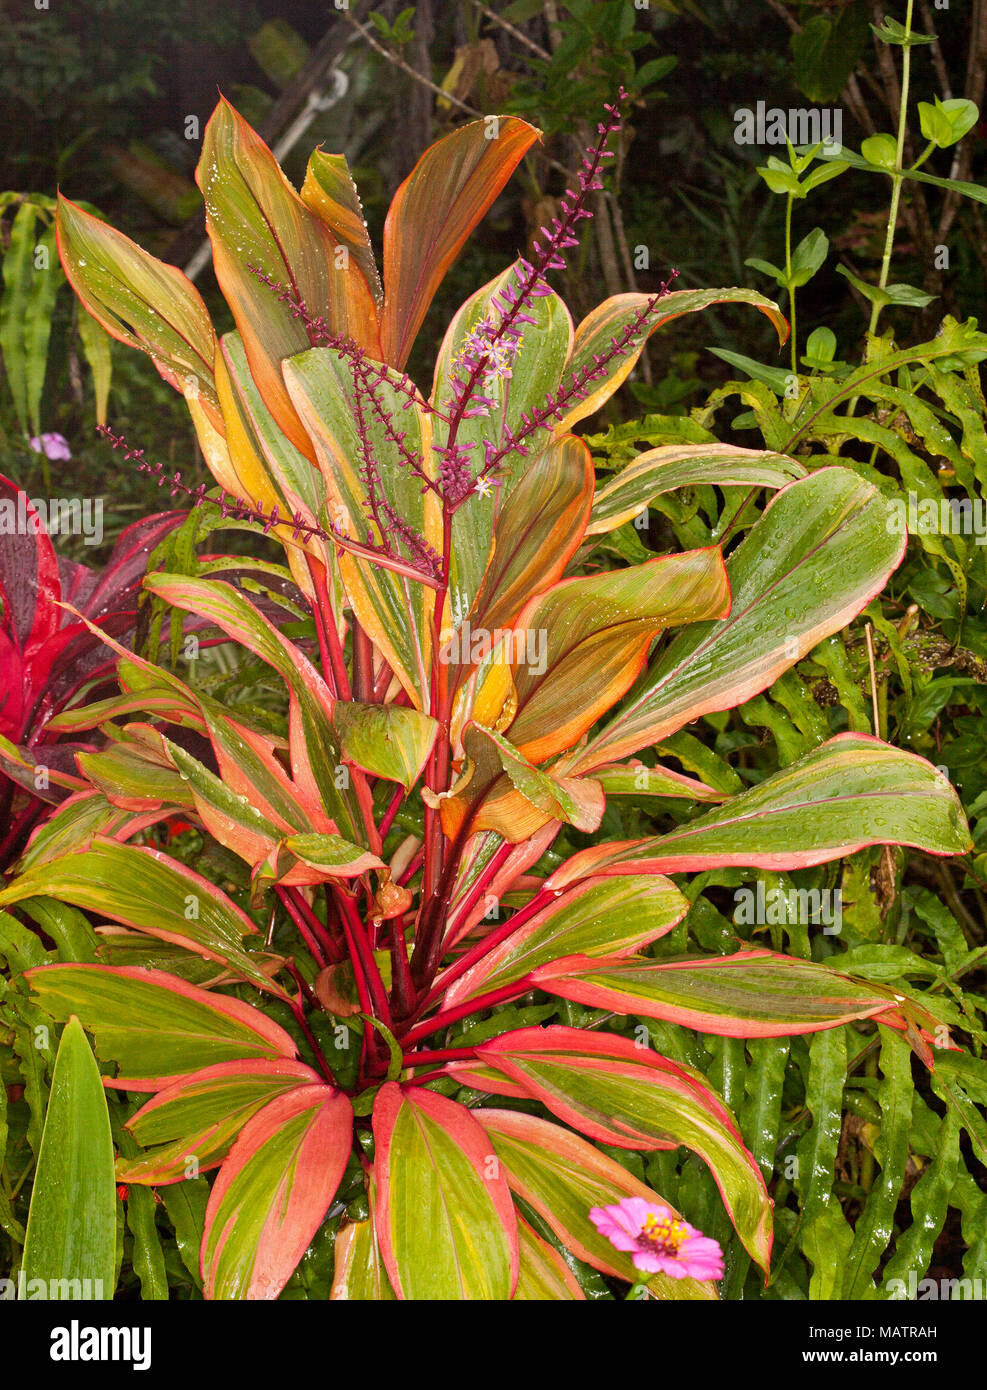 Stunning vivid orange, green and red variegated foliage of Cordyline fruticosa 'Early Morning Diamond' with flowers Stock Photo